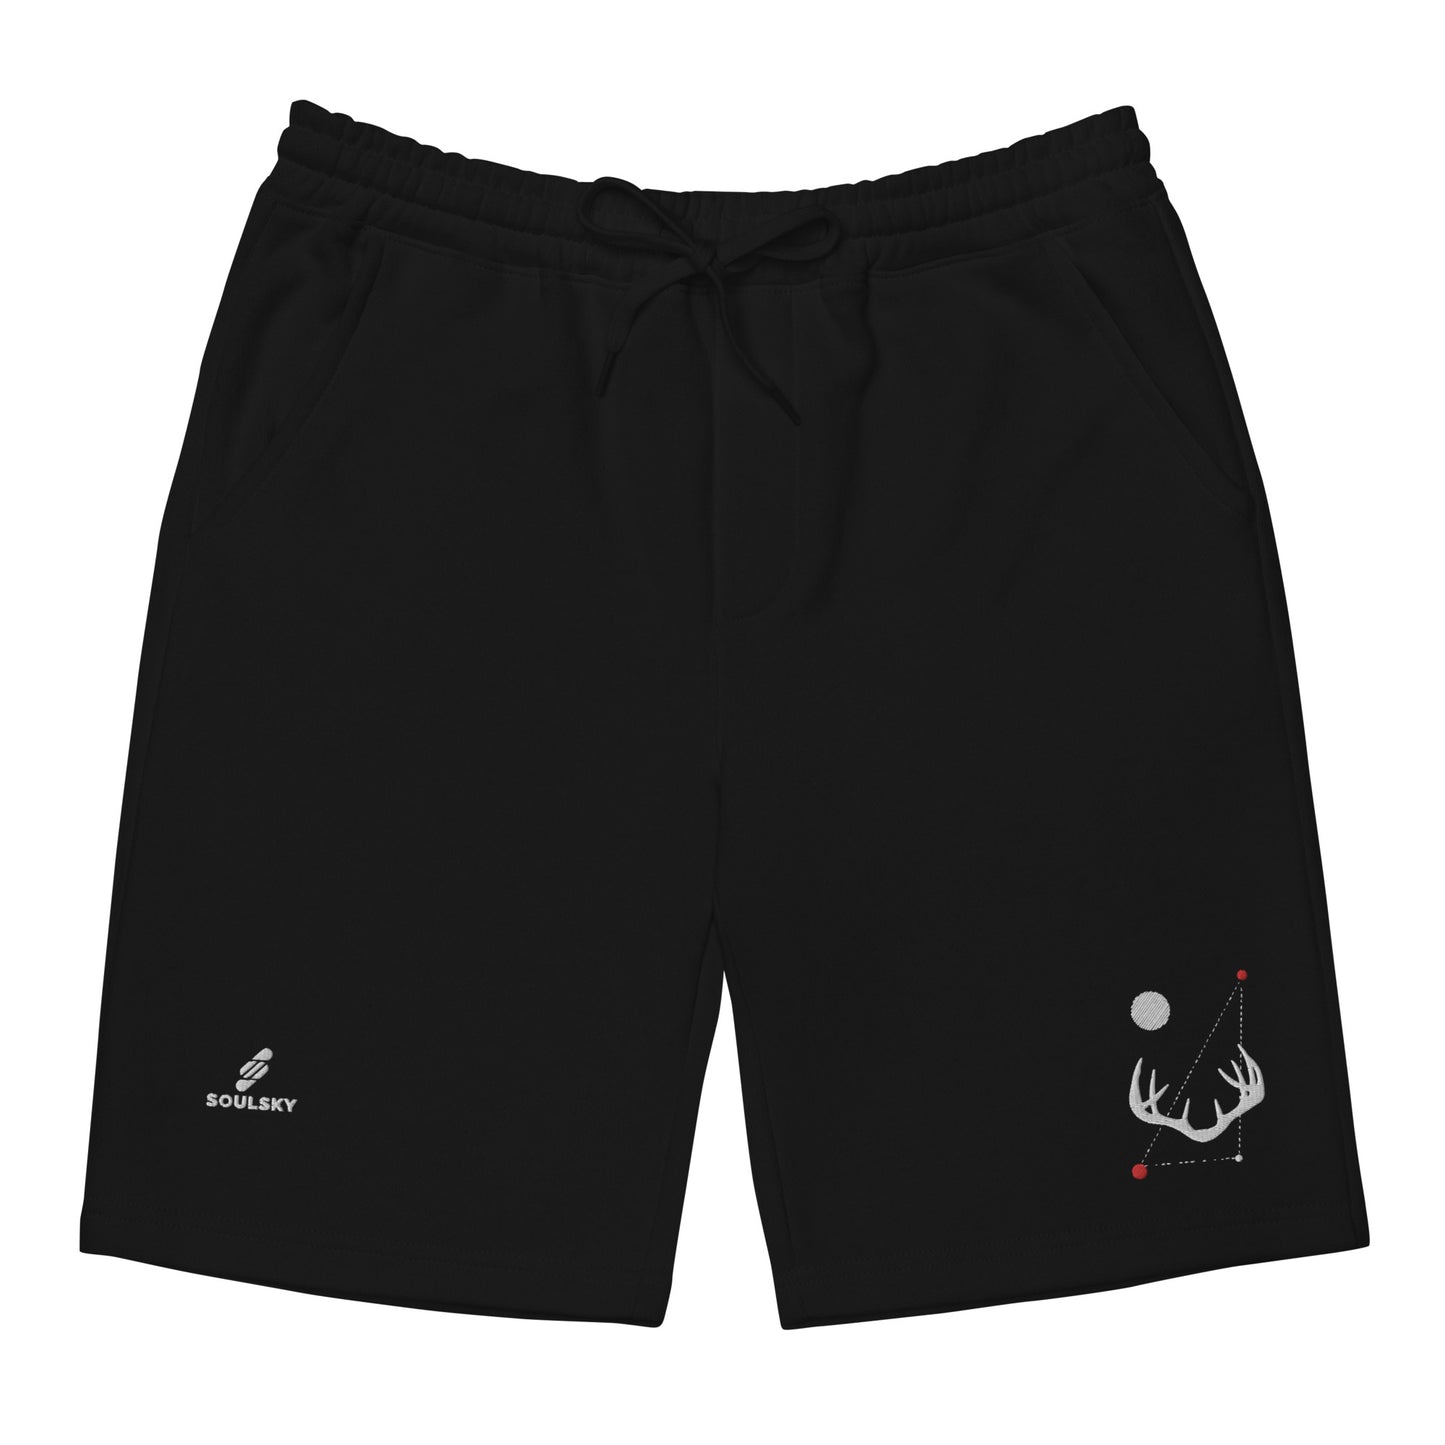 YOU ARE NOT ALONE Fleece Shorts